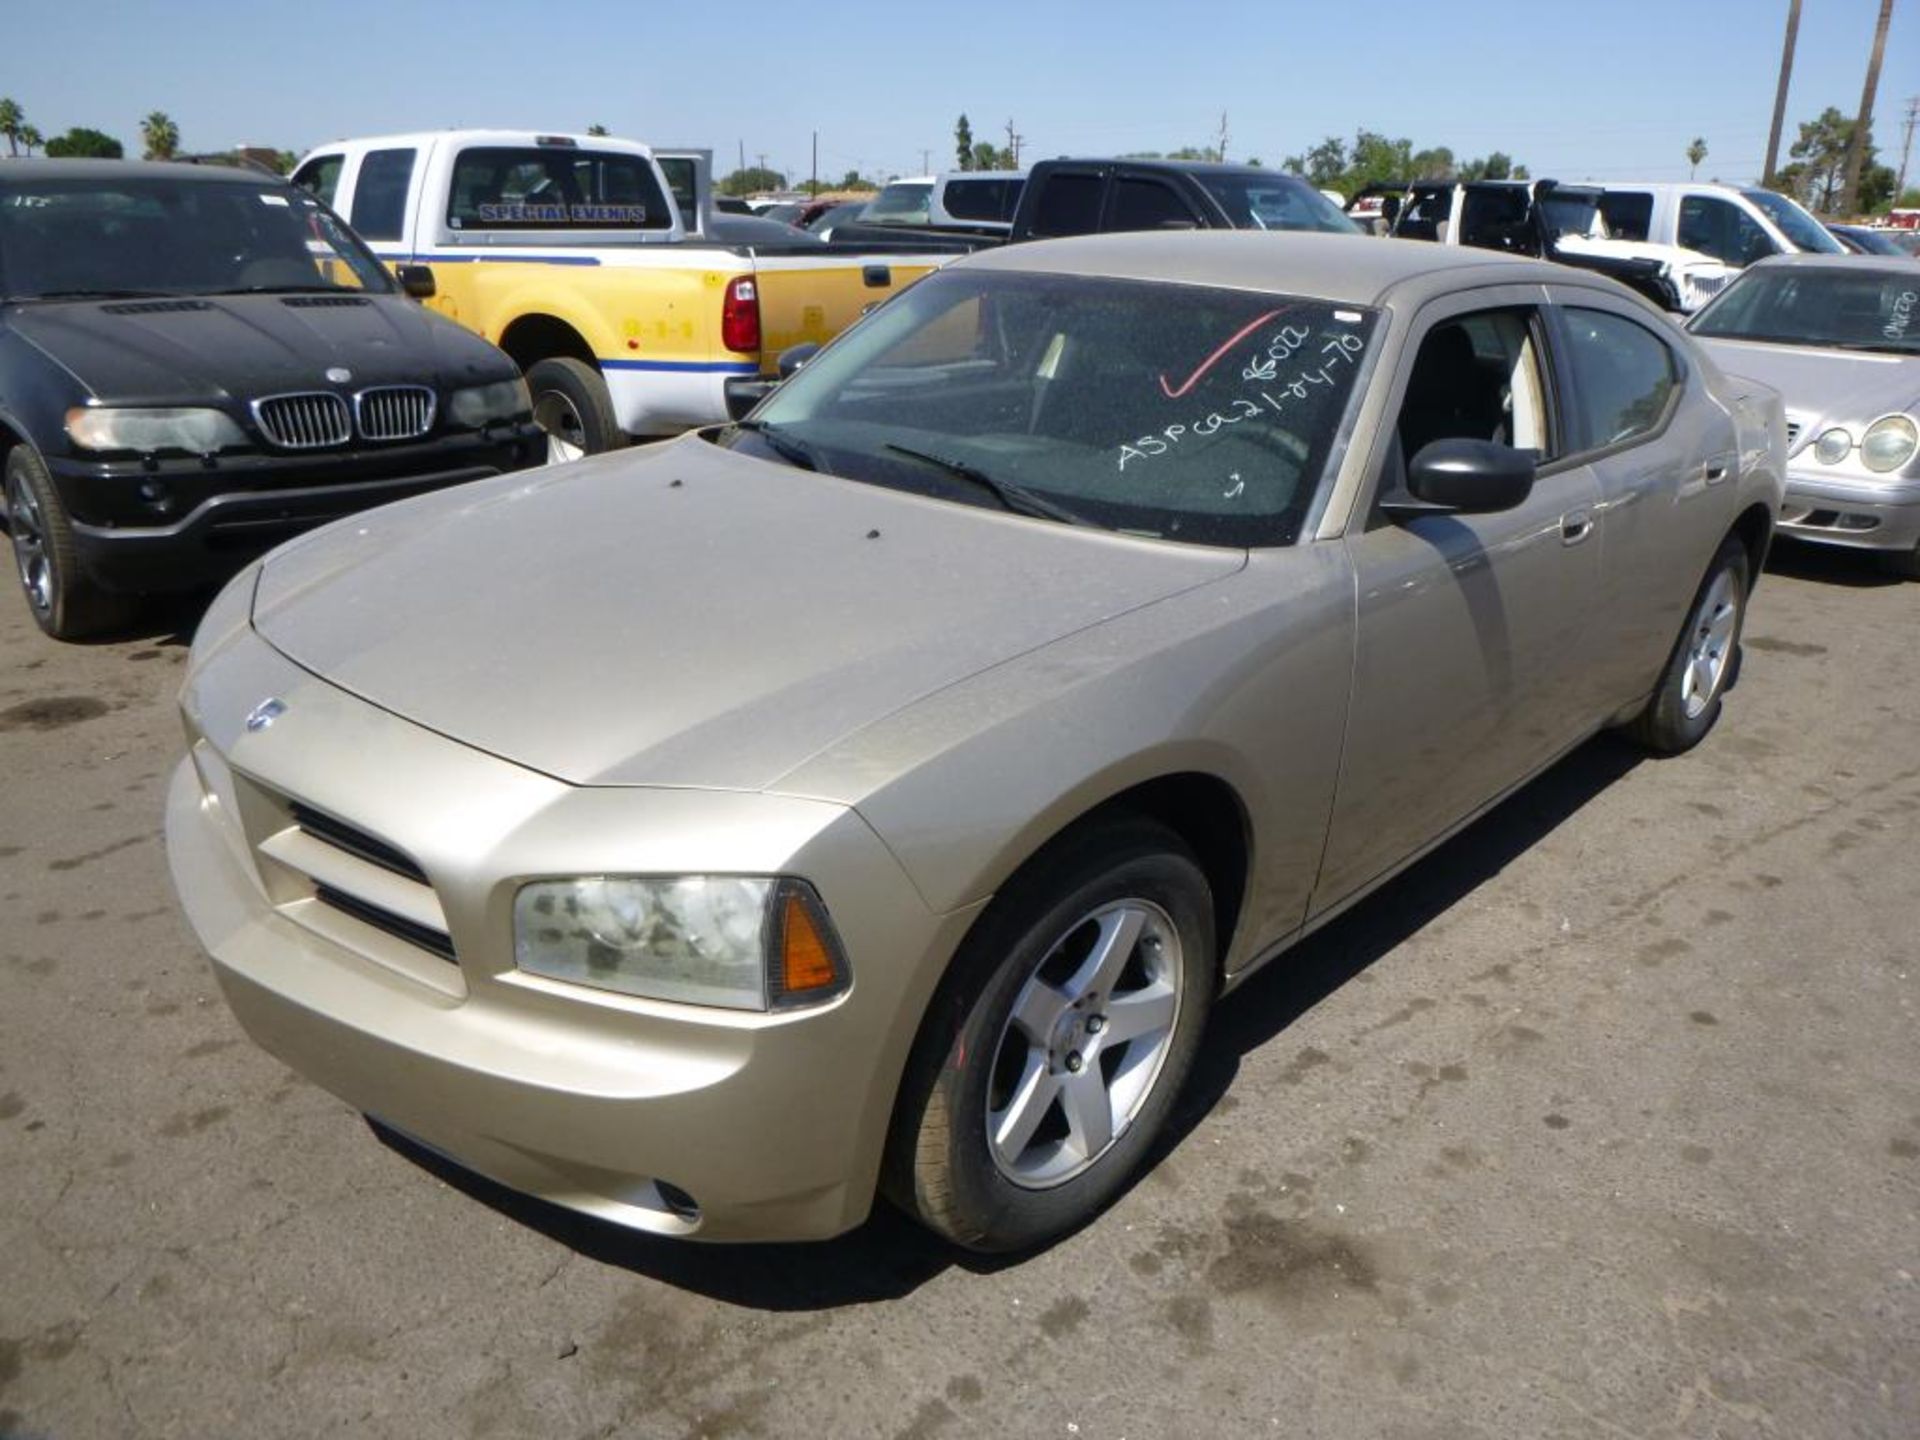 (Lot # 3310) 2008 Dodge Charger